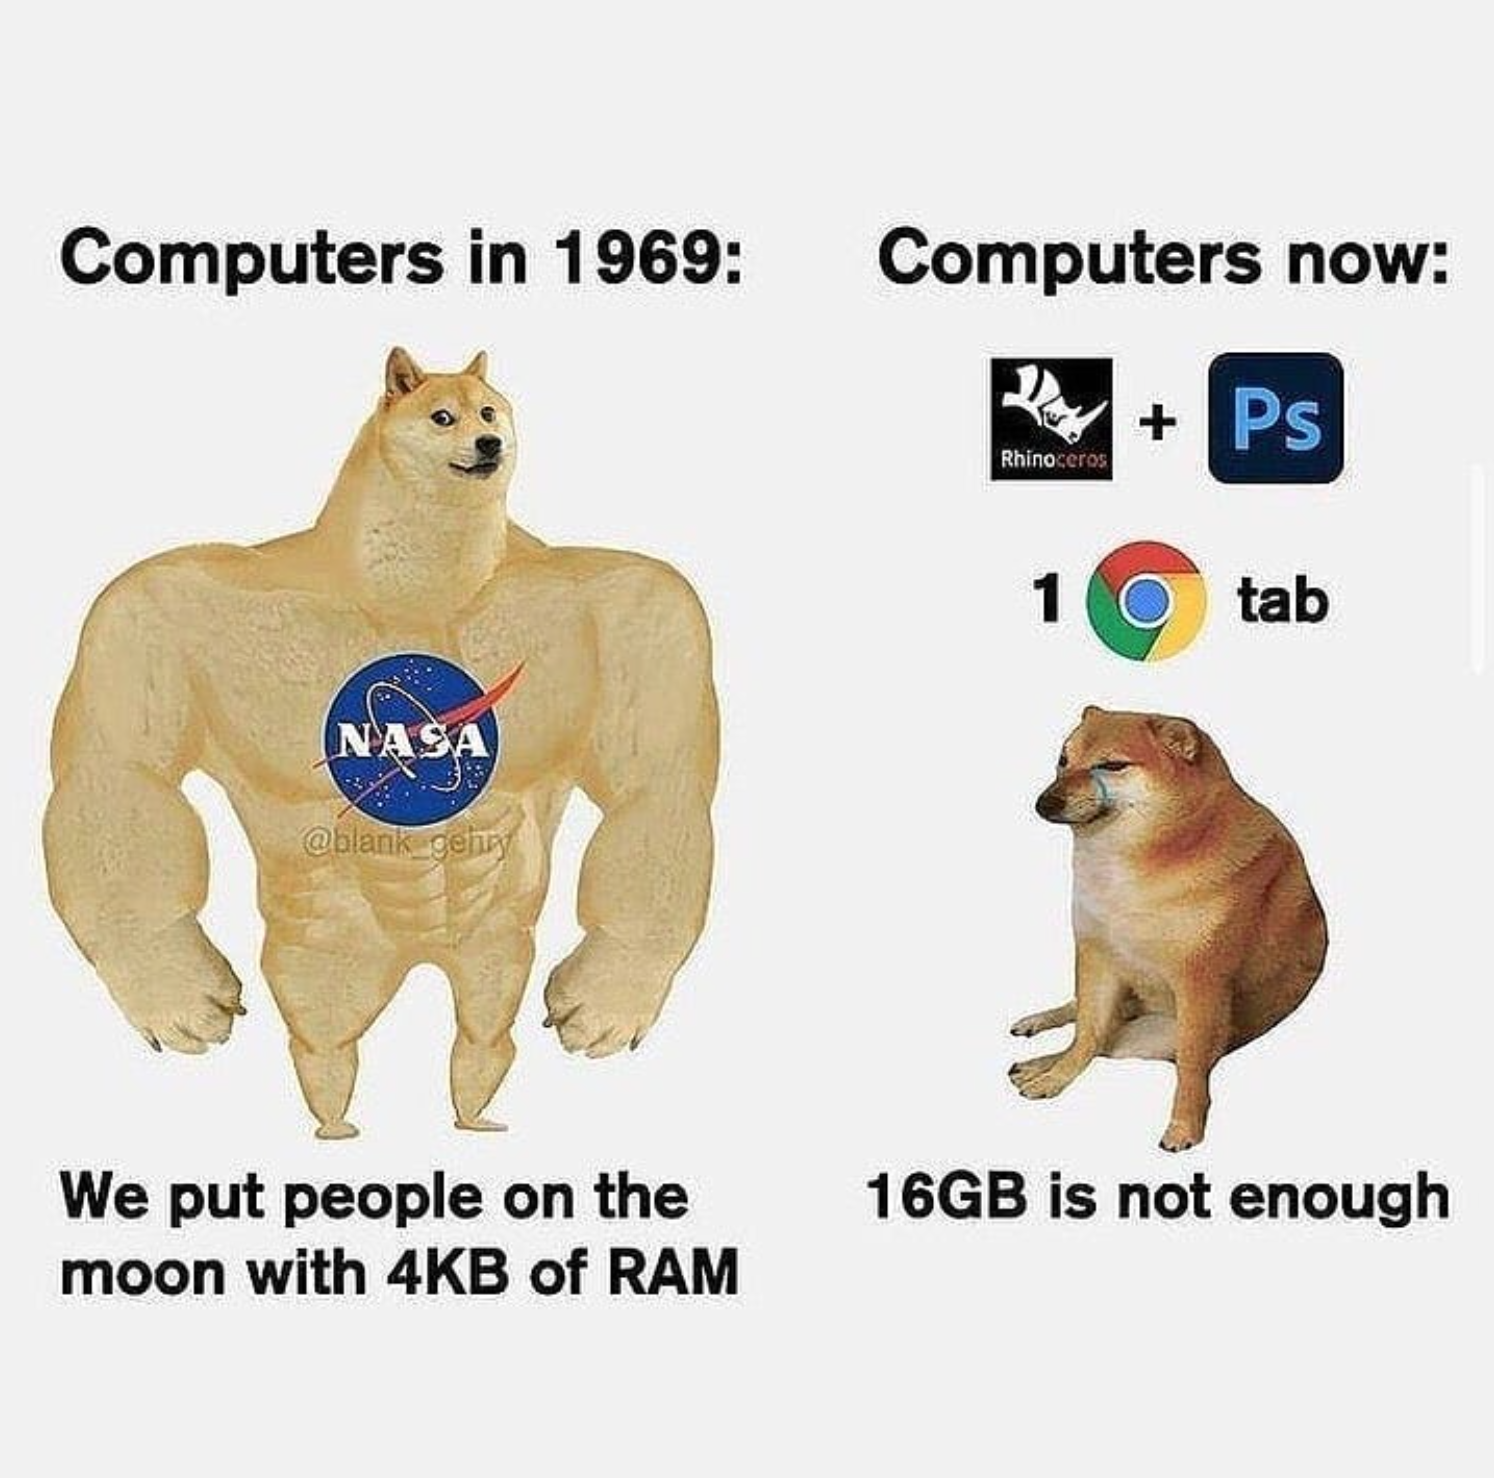 funny gaming memes - Internet meme - Computers in 1969 Computers now Ps Rhino 1 tab O Nasa 39 blogen 16GB is not enough We put people on the moon with 4KB of Ram